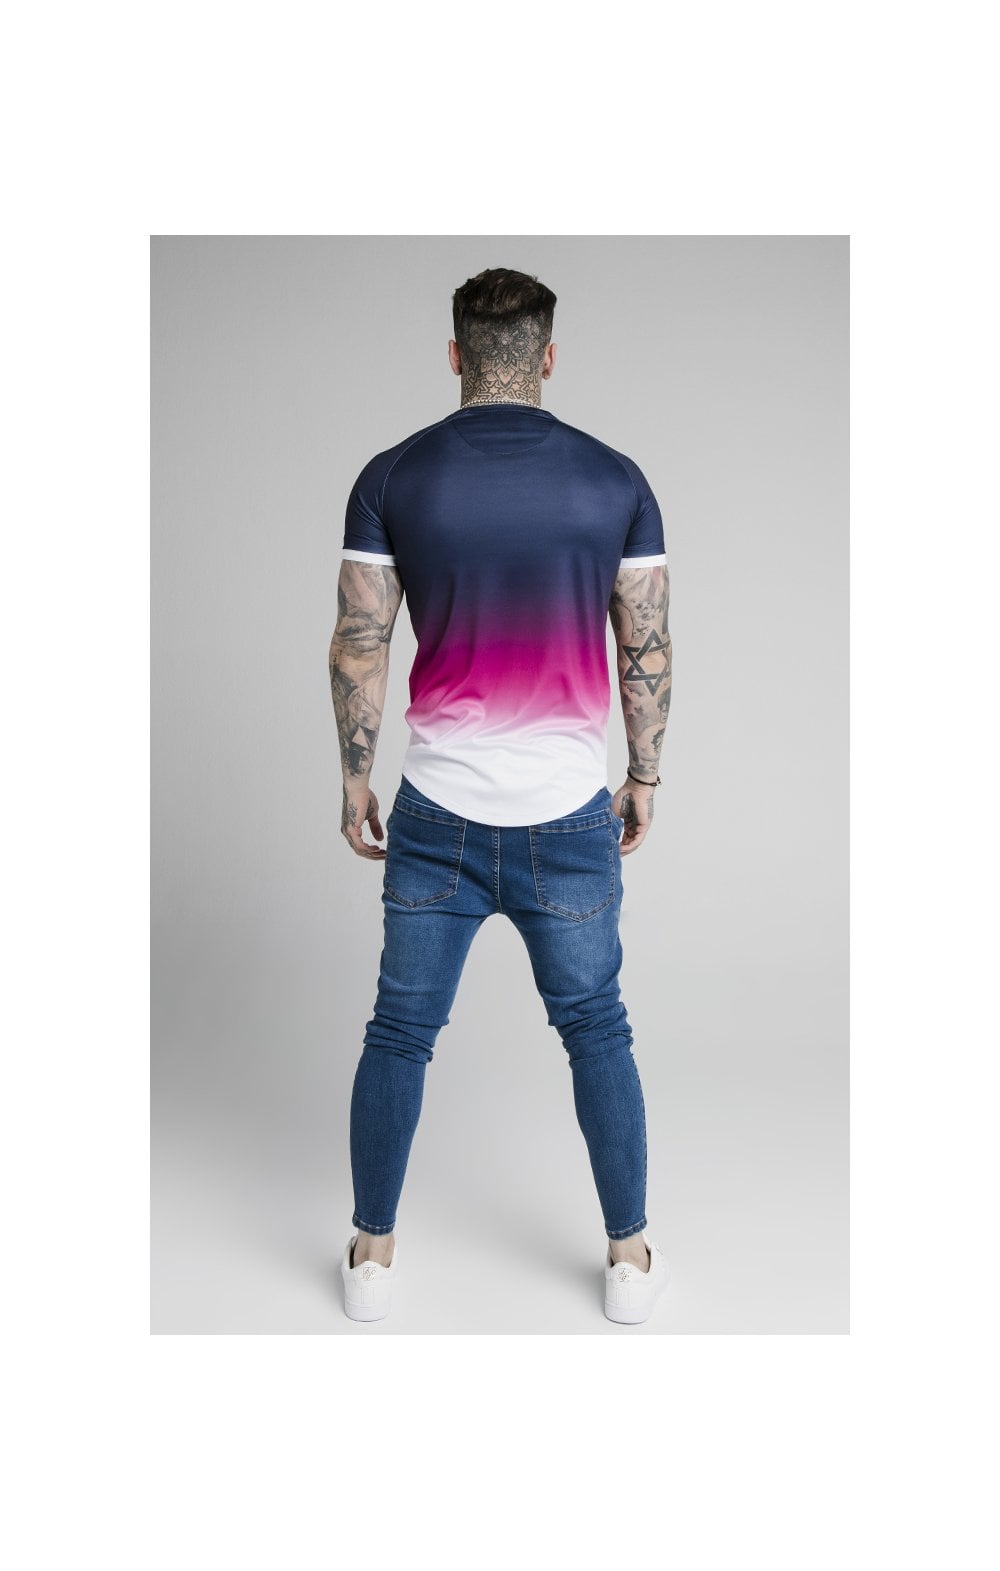 SikSilk S/S Inset Cuff Fade Tech Tee - Navy
                    
                        Pink & White (4)